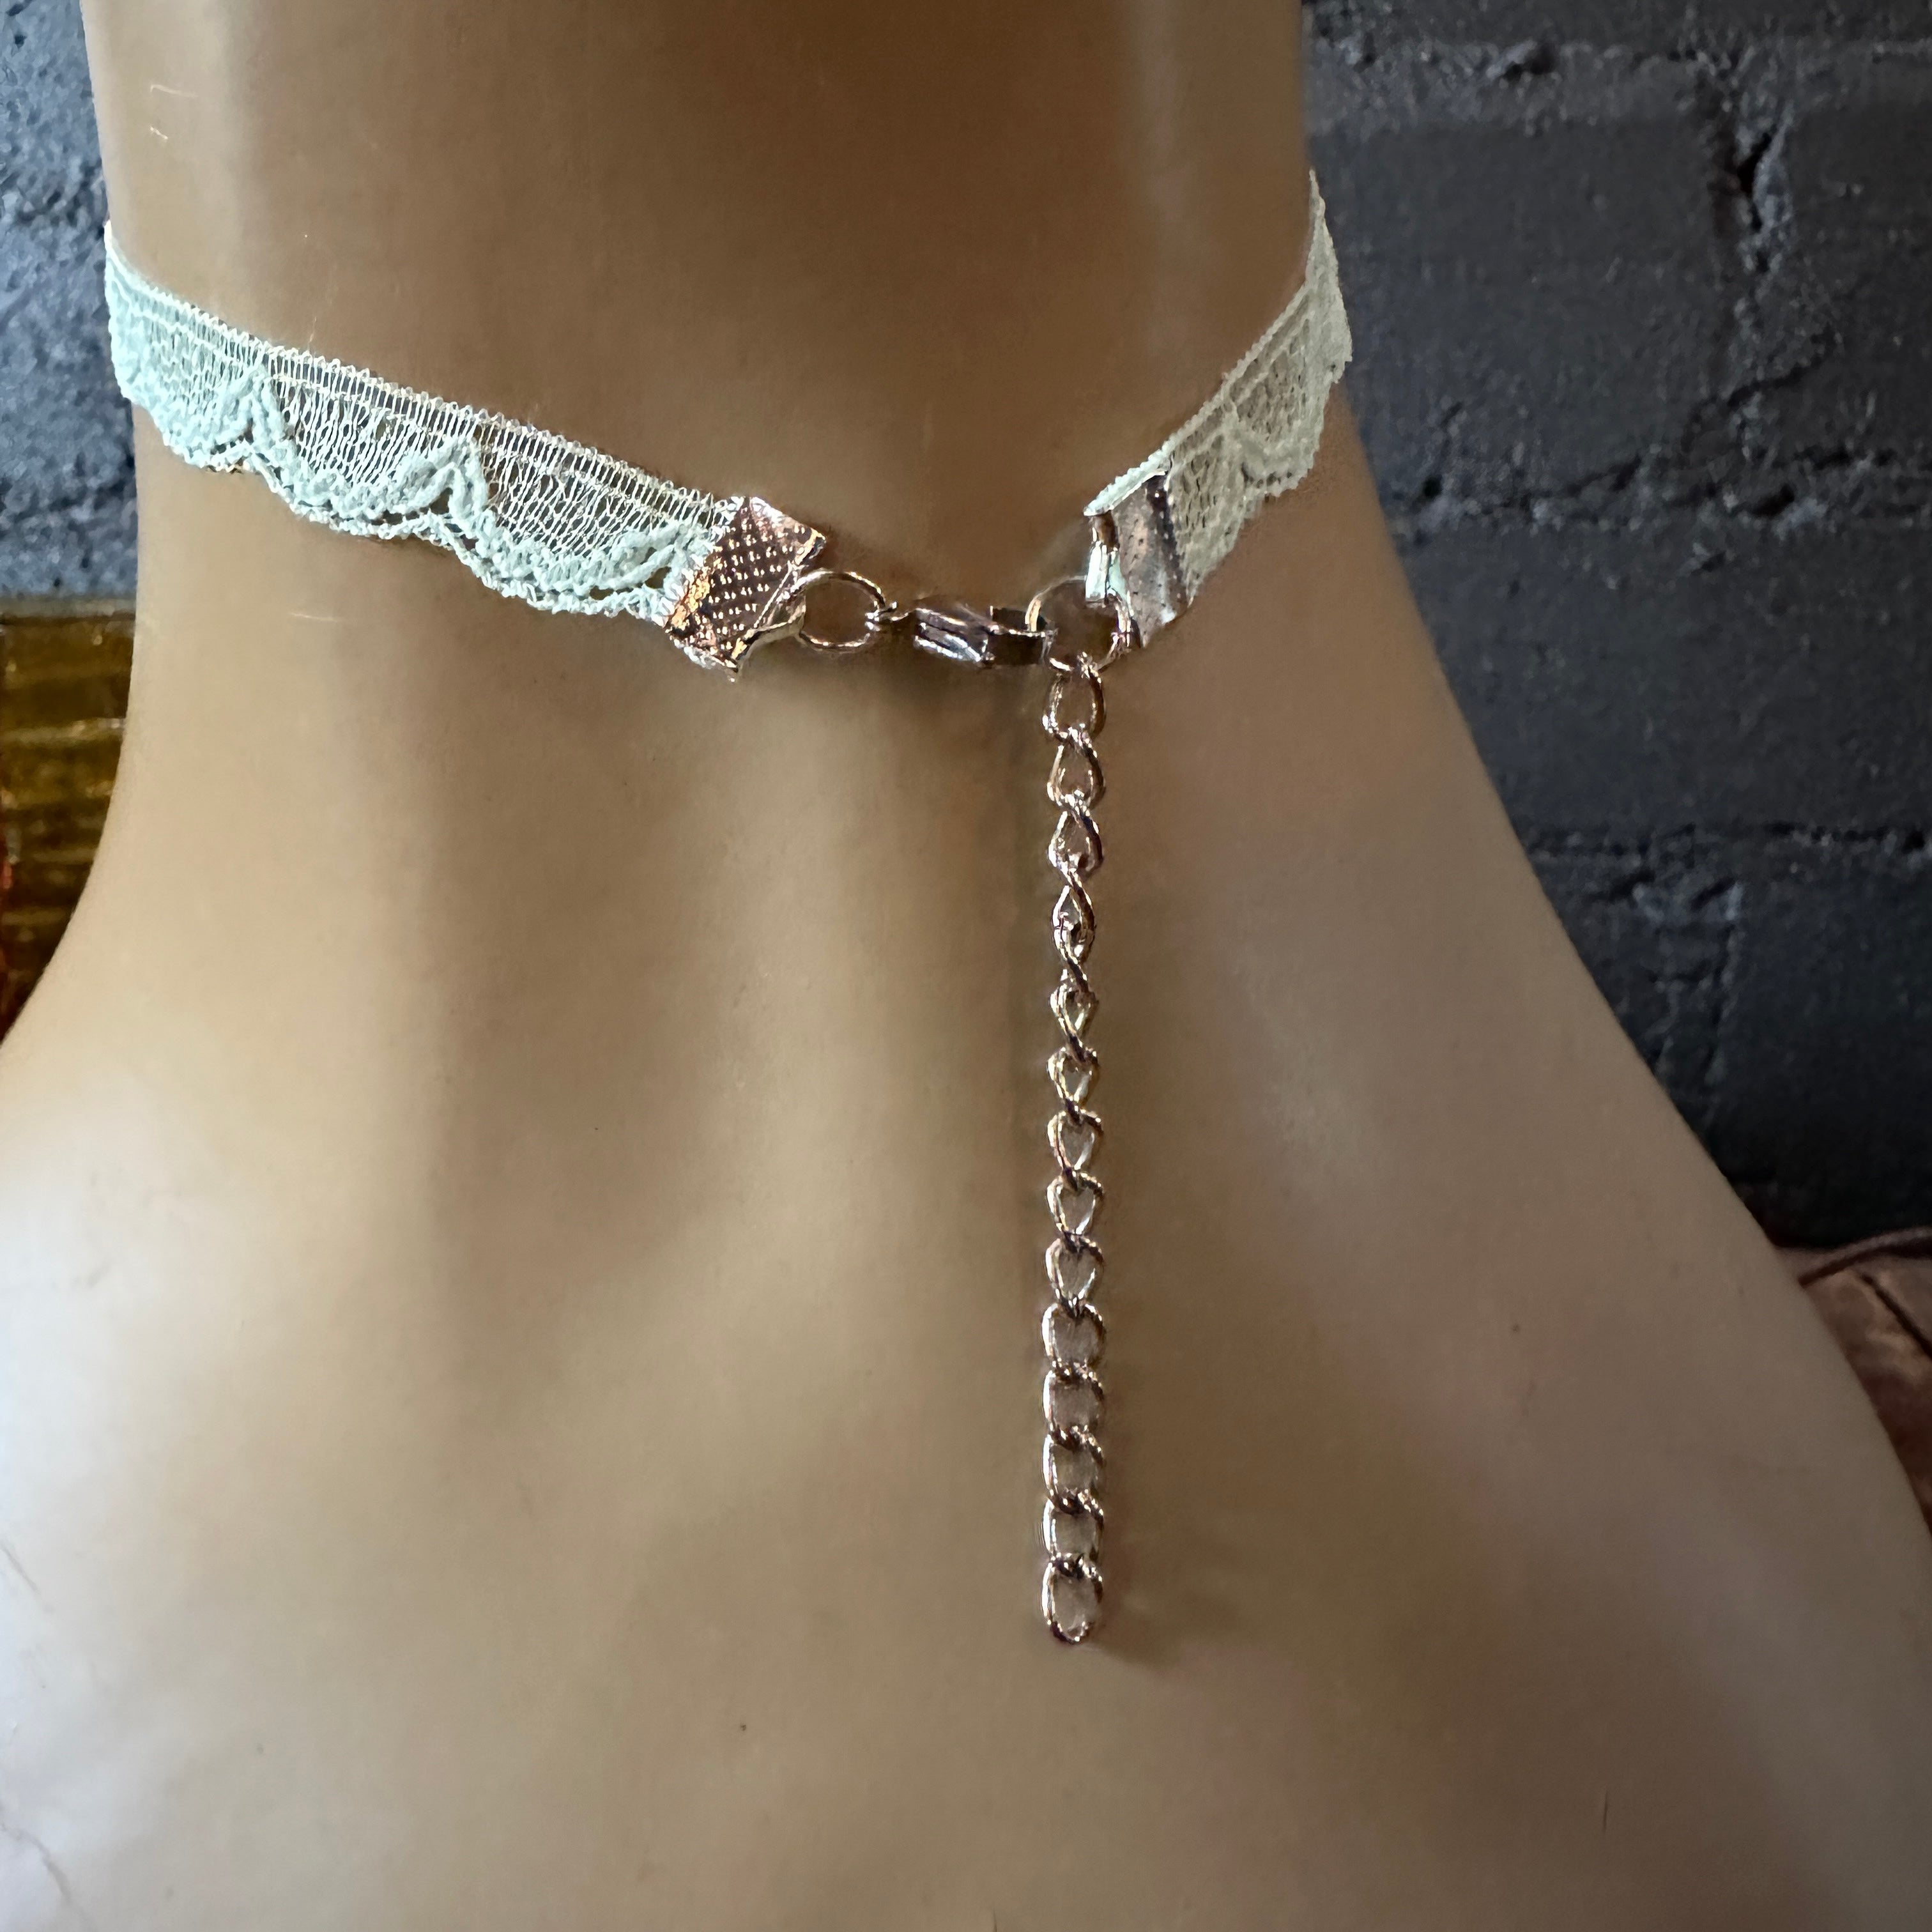 recycled vintage lace choker